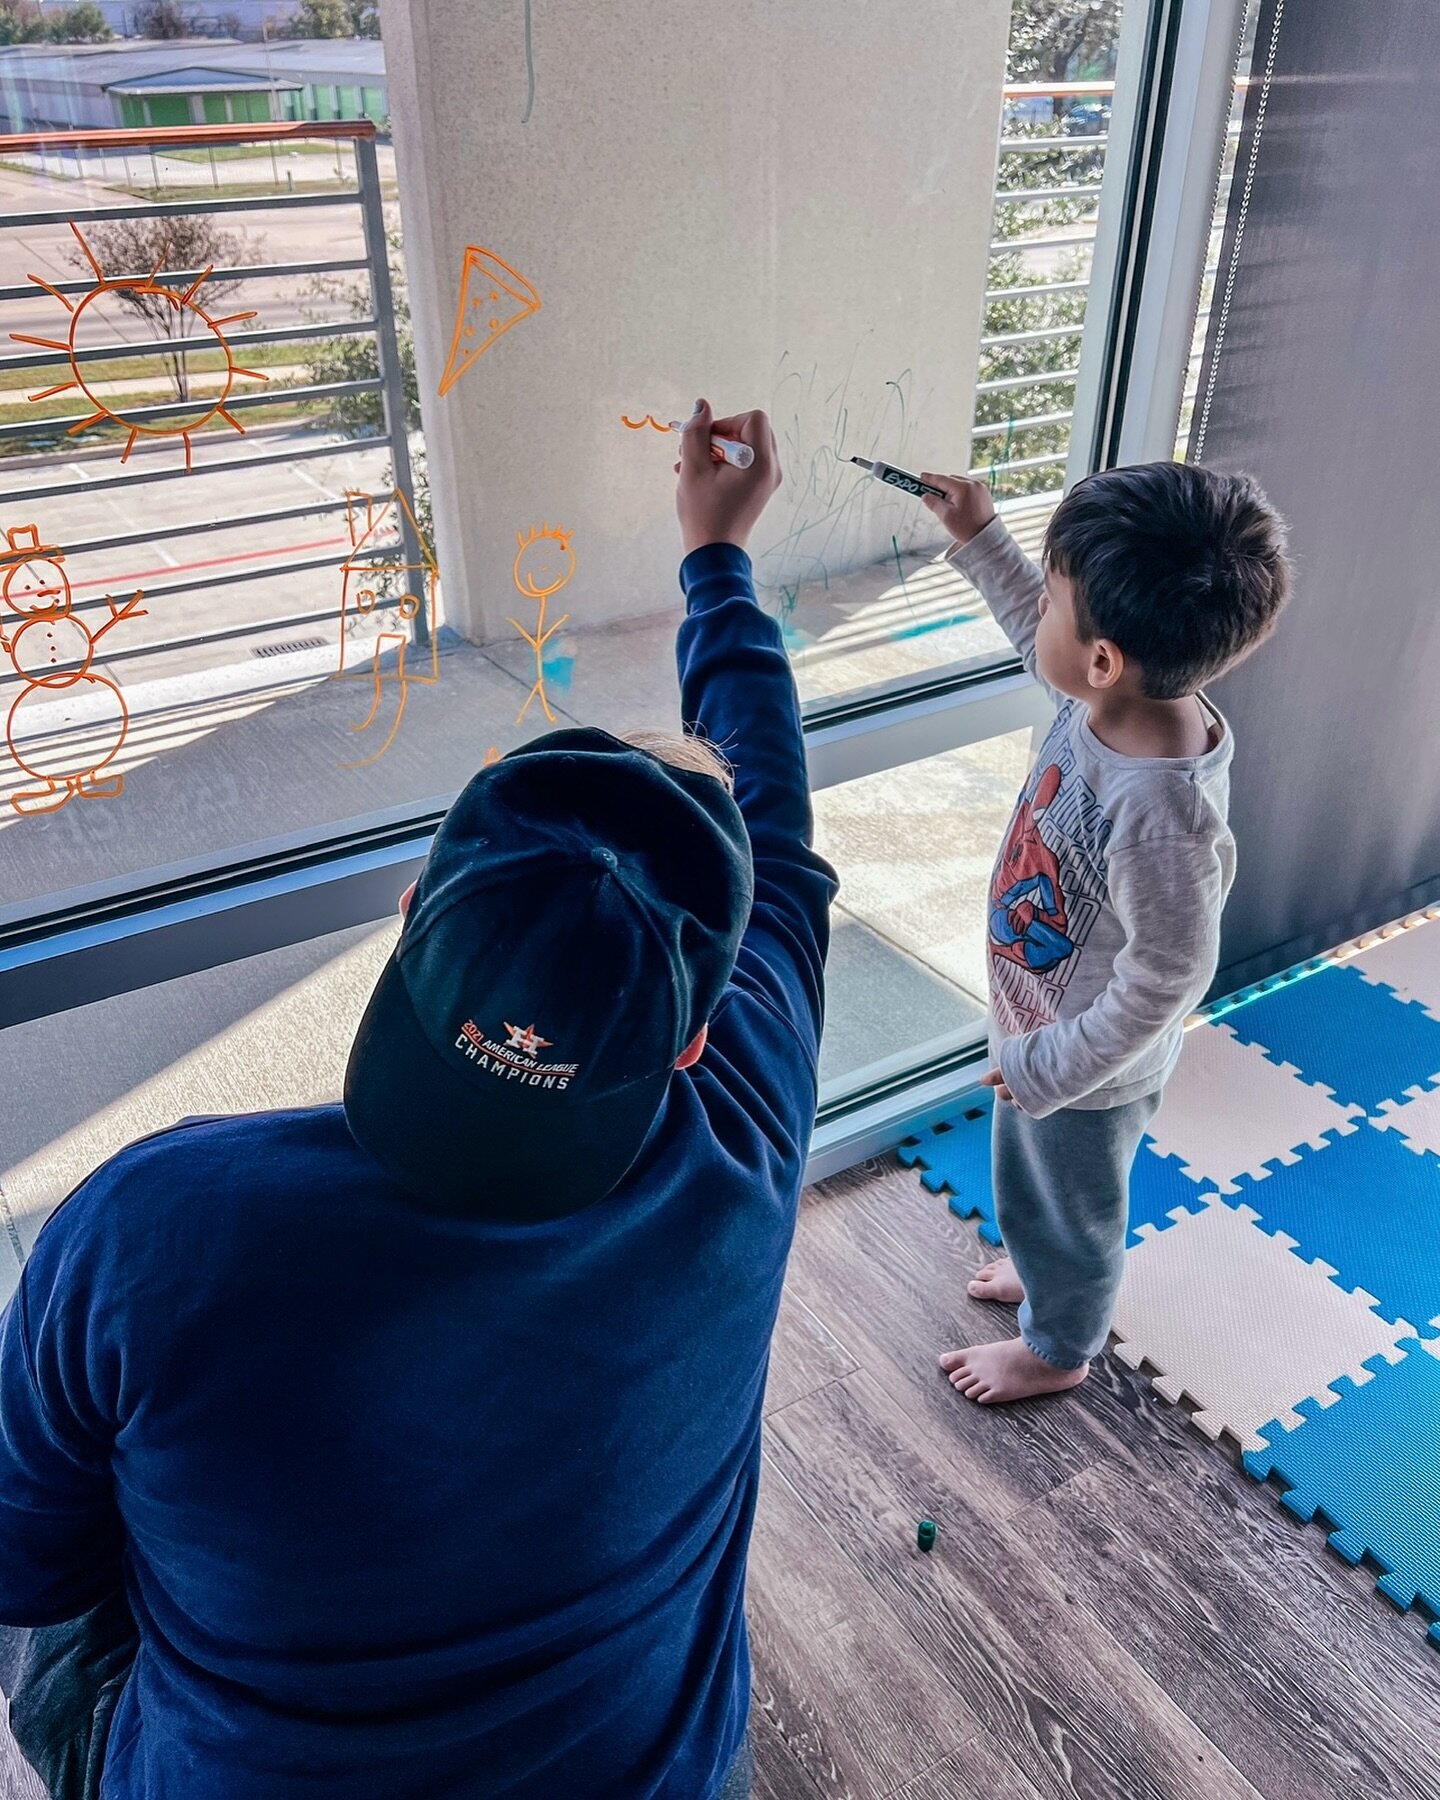 Our floor-length windows are the perfect canvas 🎨✍🏼✨ S/O to our very own Lalo for hanging with our kiddos in between sessions! #PediatricTherapy #HoustonTherapy #HoustonTherapist #SpeechTherapy #OccupationalTherapy #PhysicalTherapy #PediatricOccupa